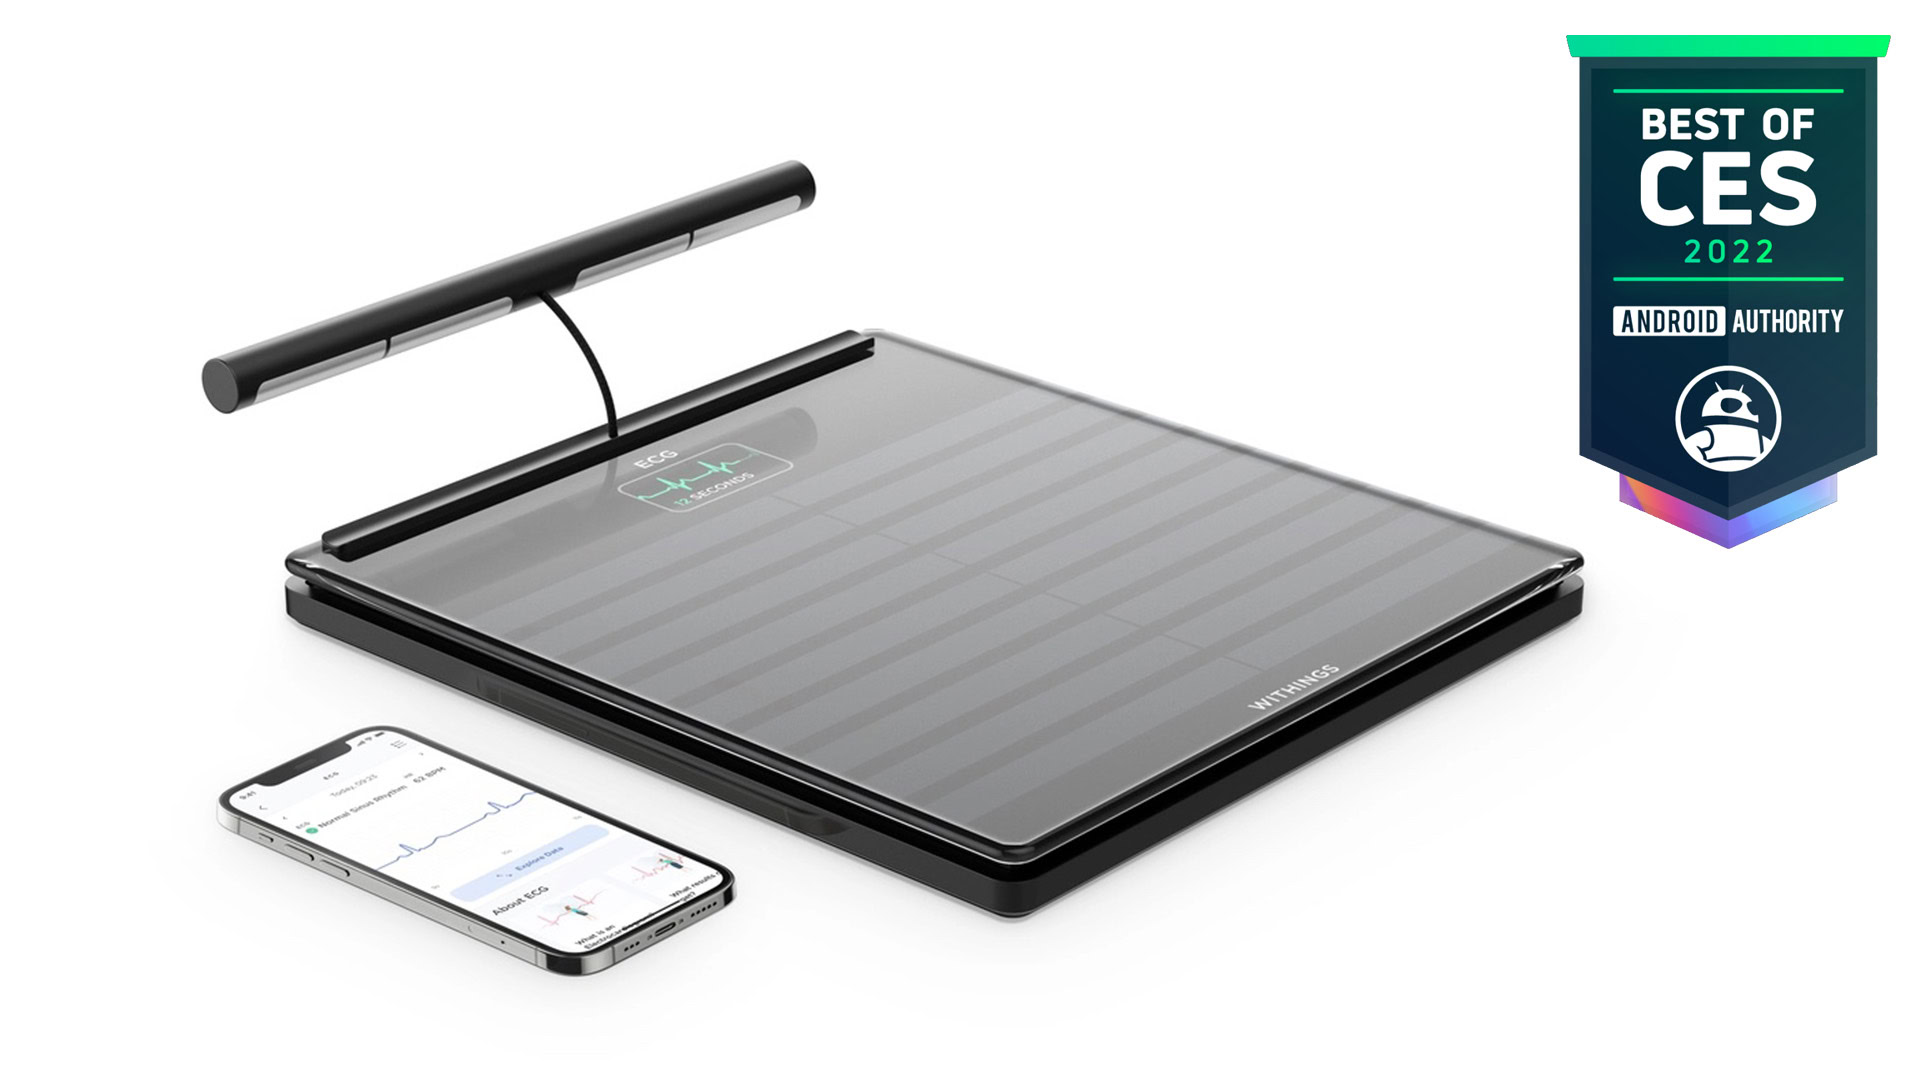 Withings Body Scan smart scale Android Authority Best of CES 2022 Award winner